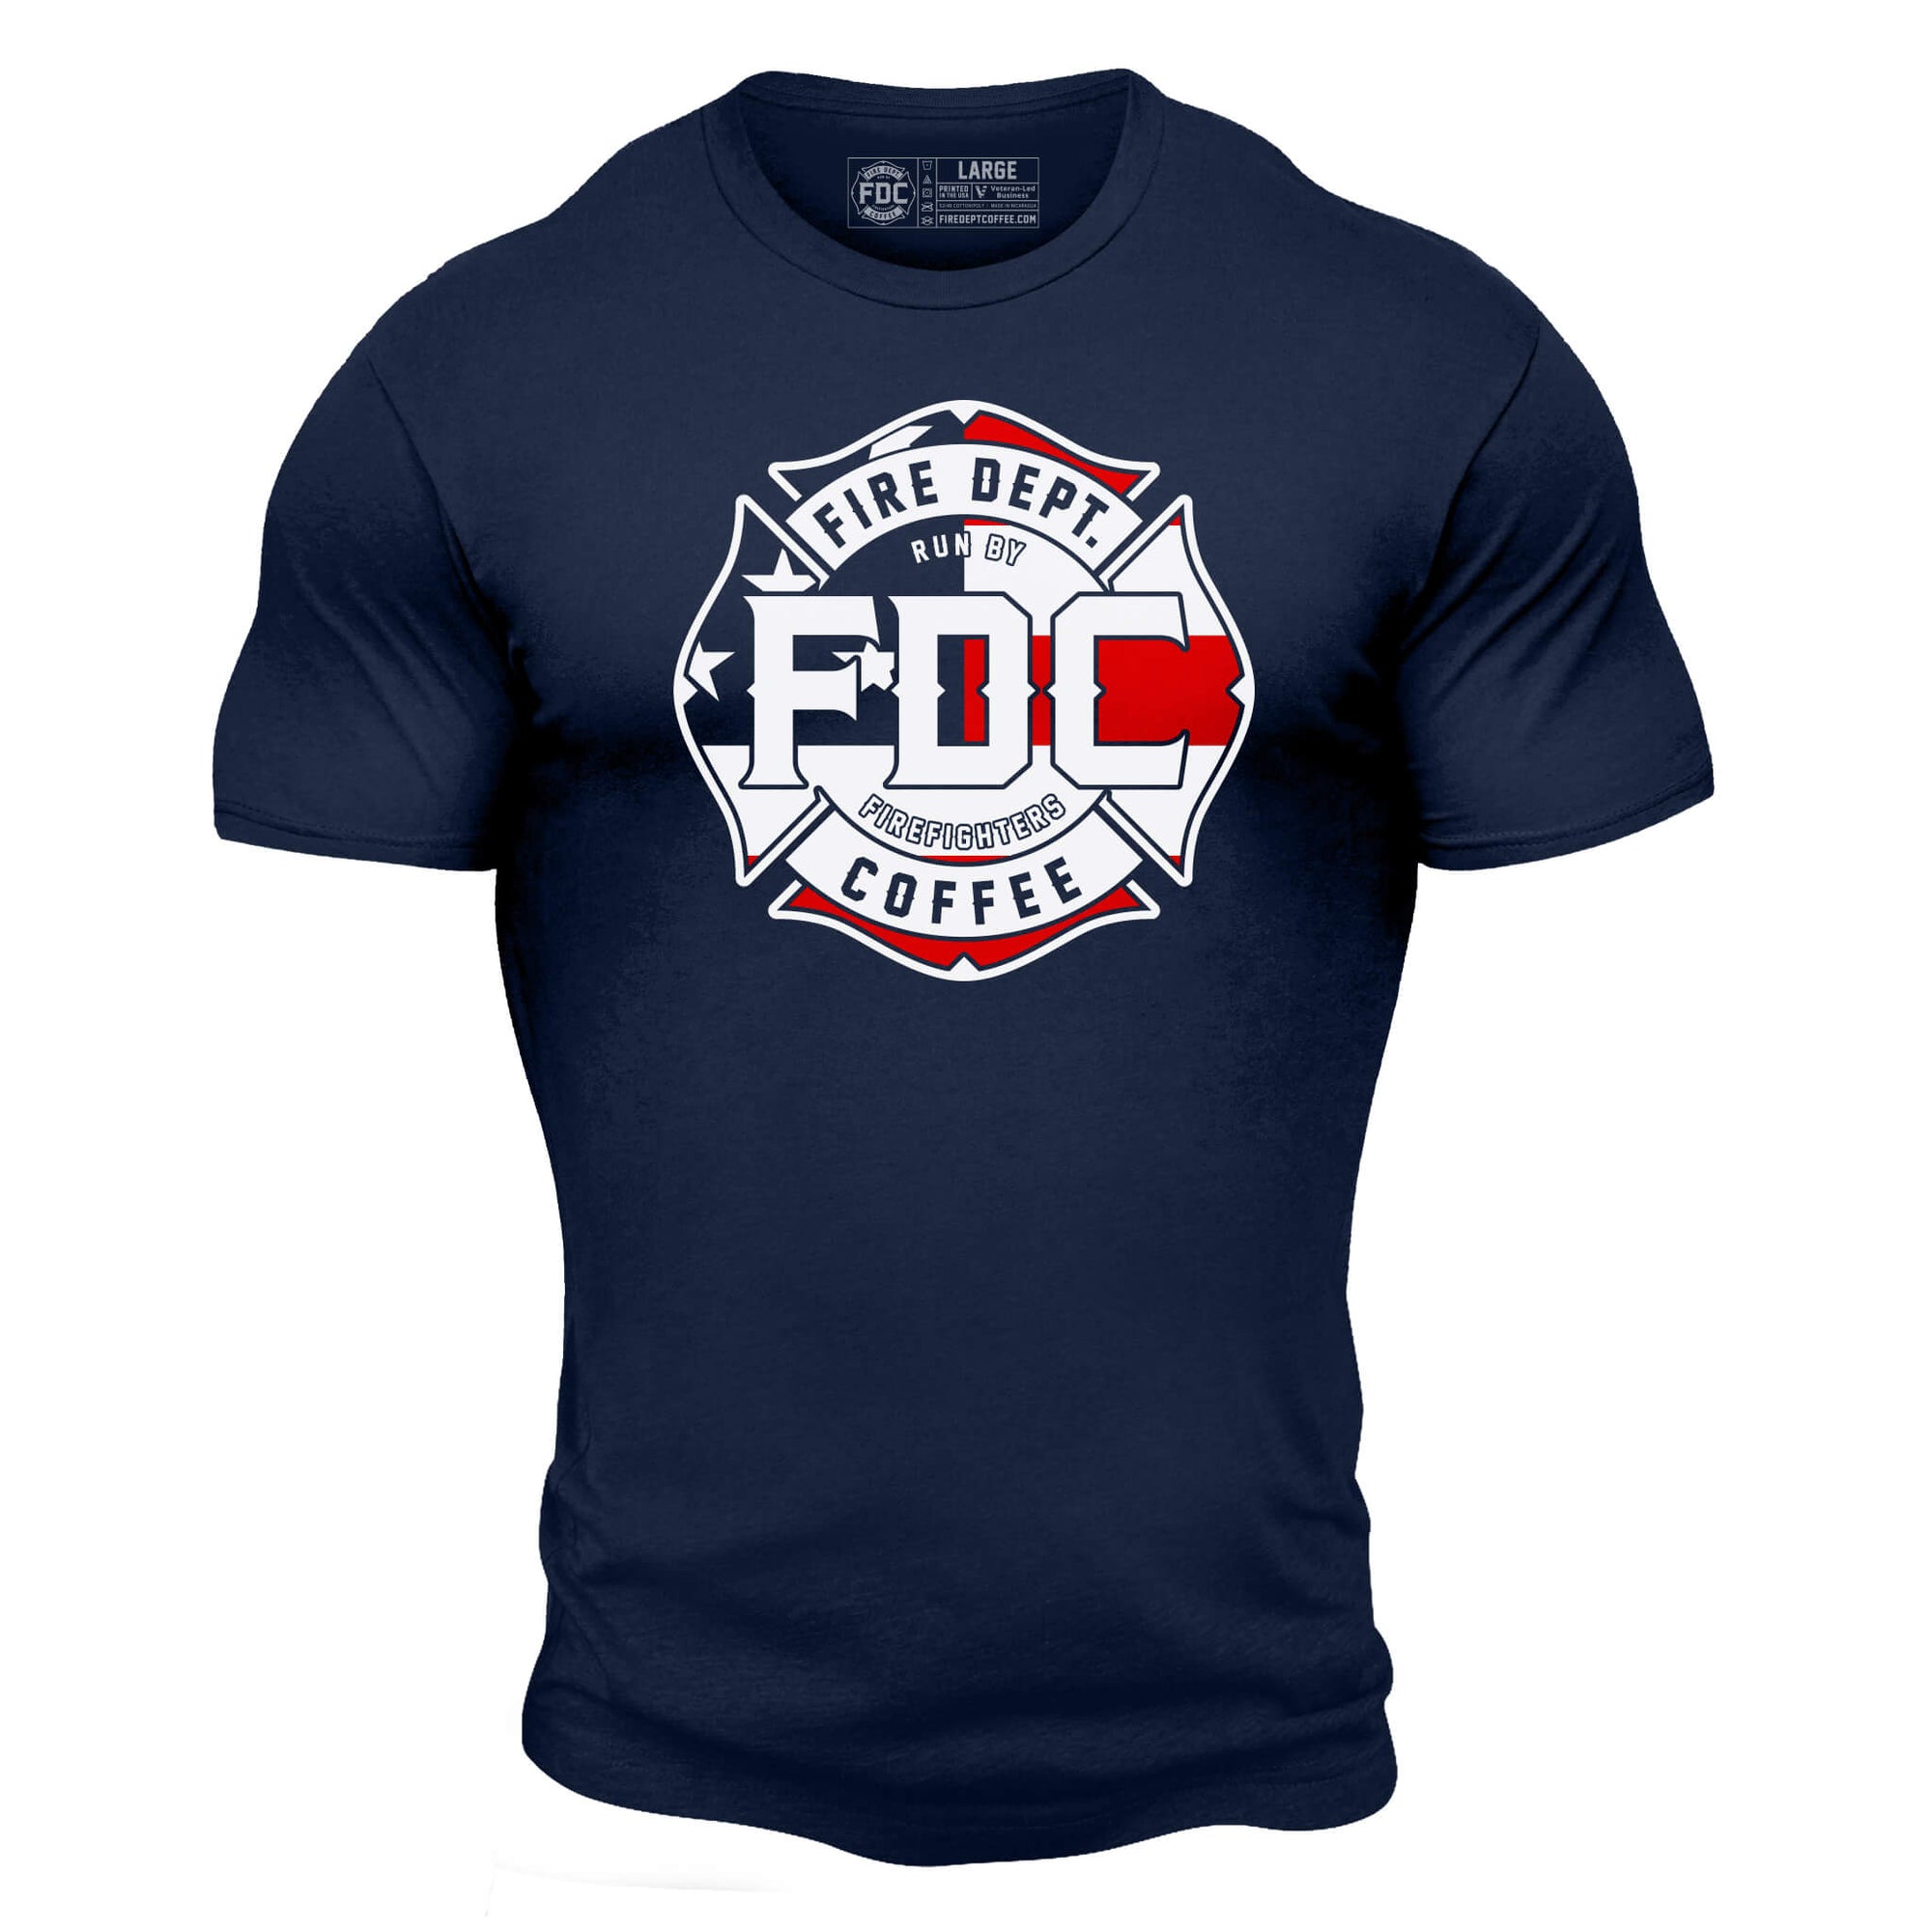 Navy t shirt with a large FDC maltese cross logo over an American flag background on chest.